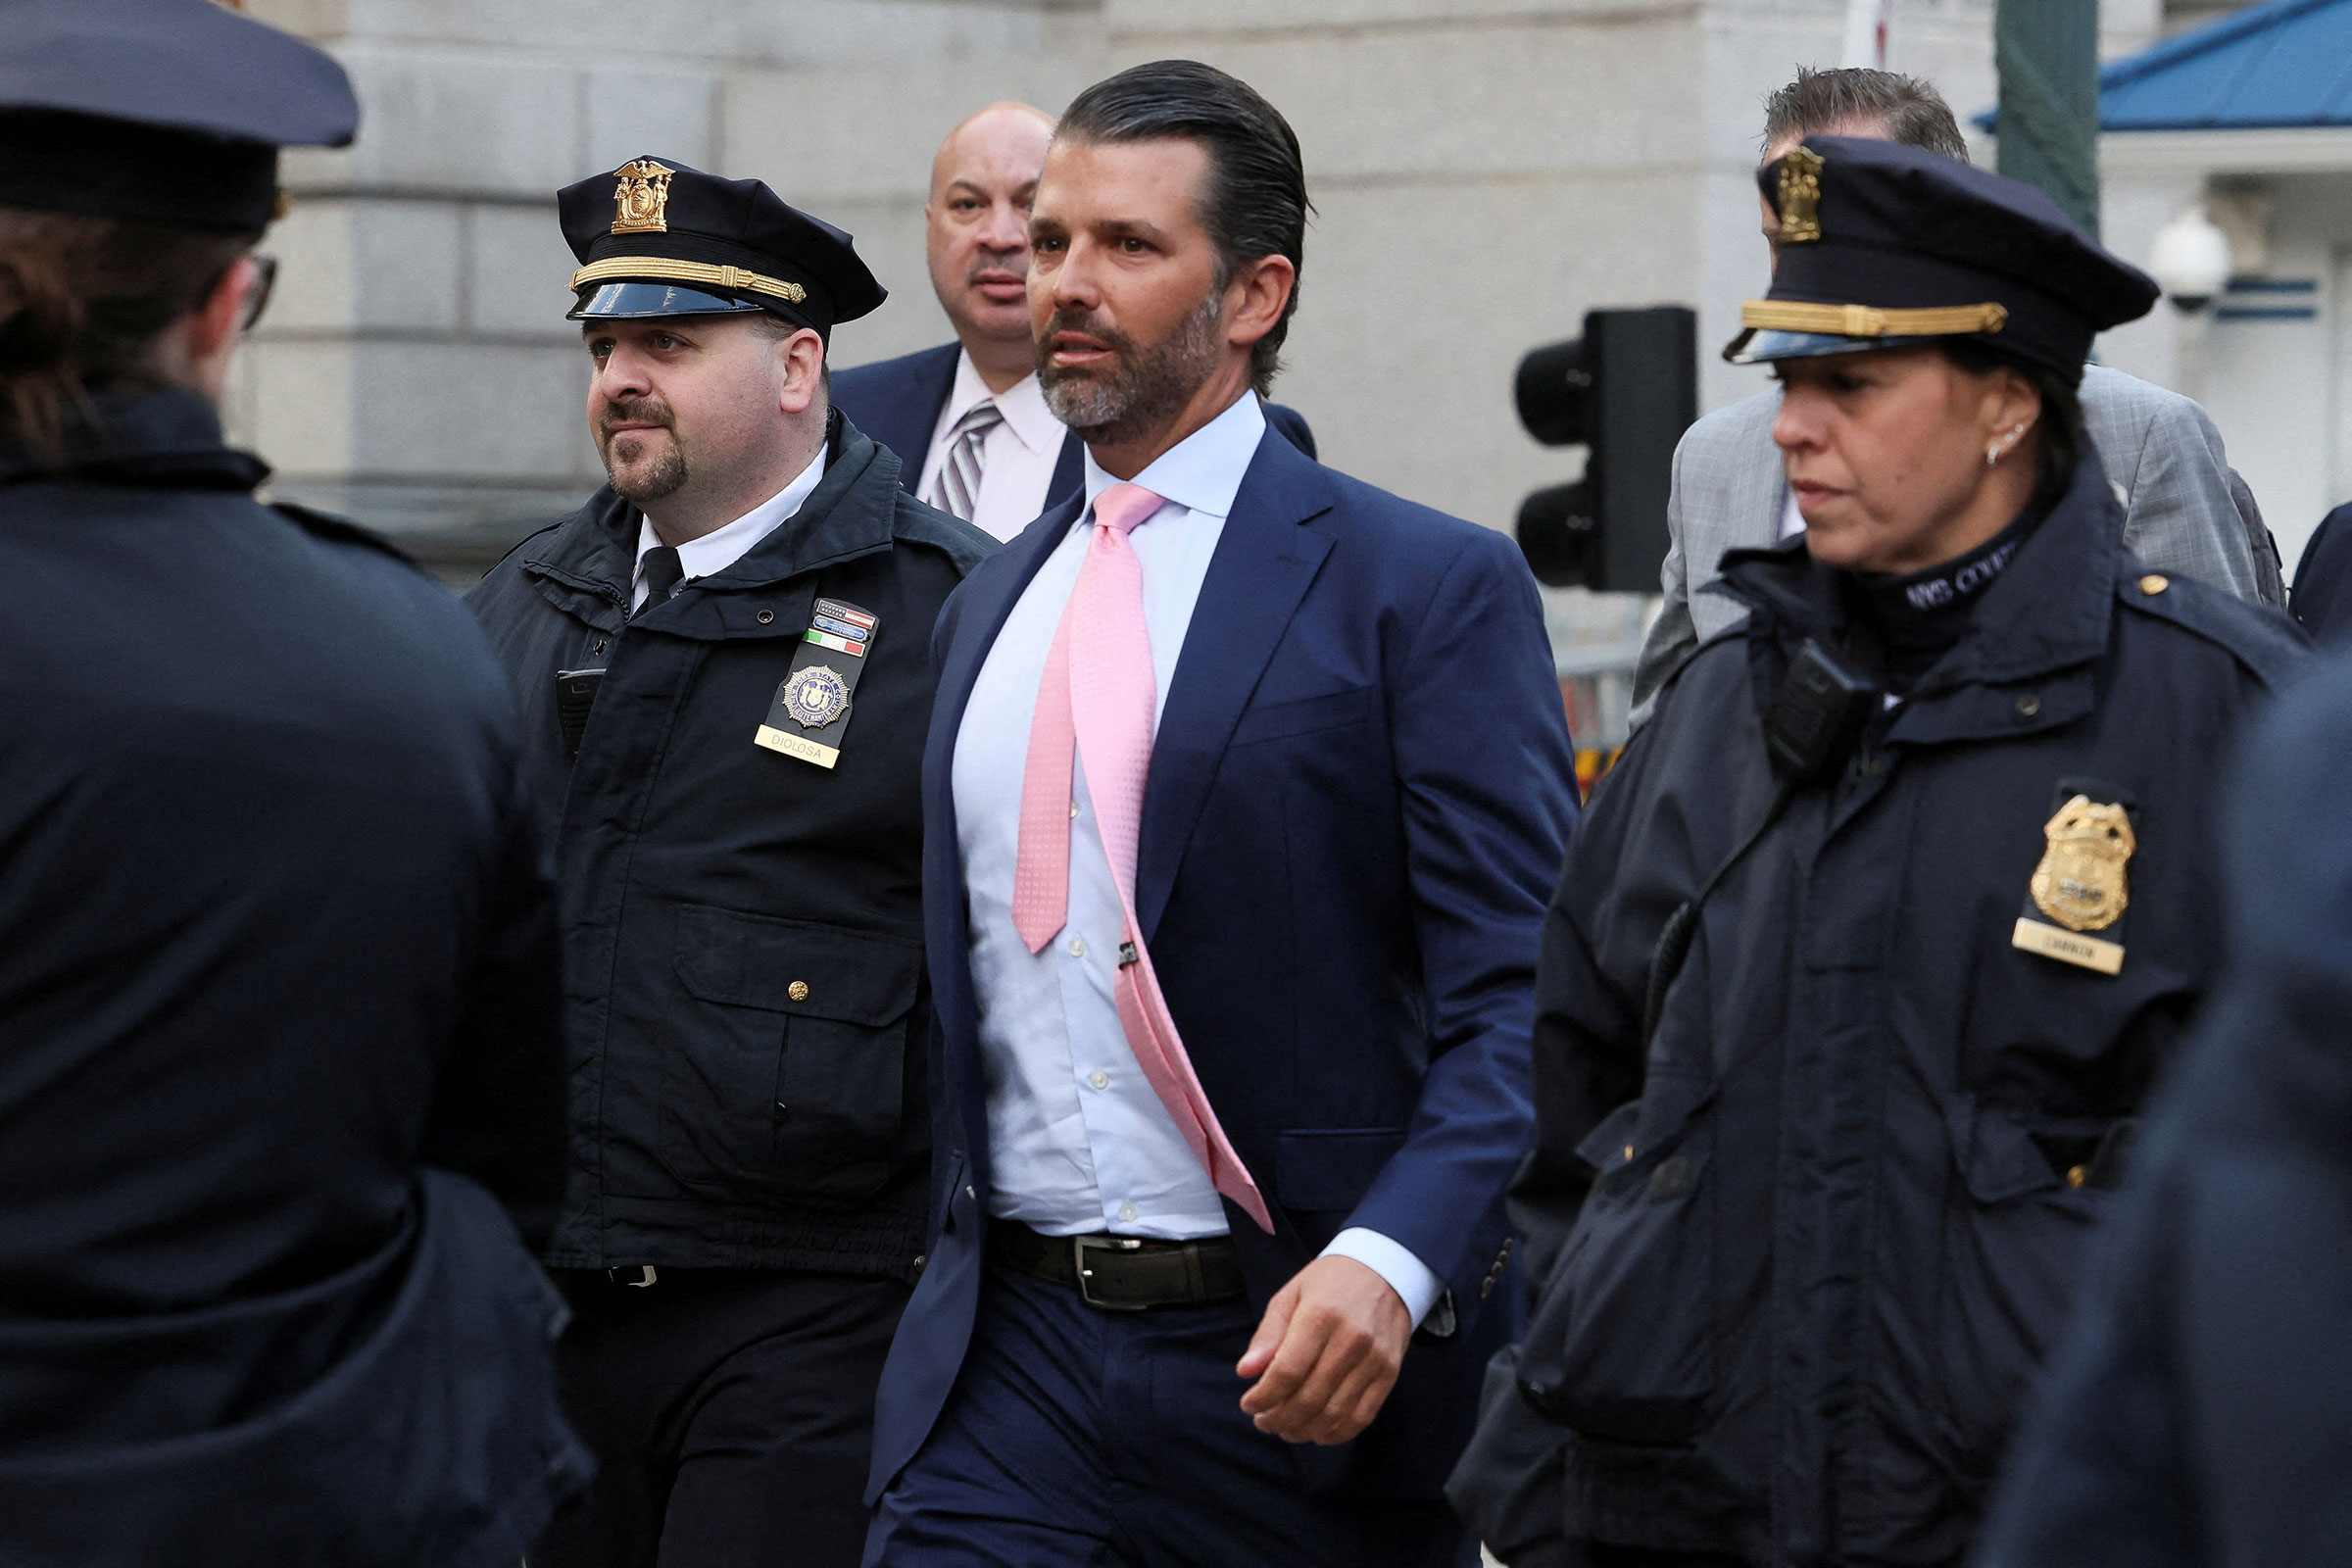 Former President Donald Trump's son and co-defendant Donald Trump Jr. arrives to attend the Trump Organization civil fraud trial in New York Supreme Court on November 1.